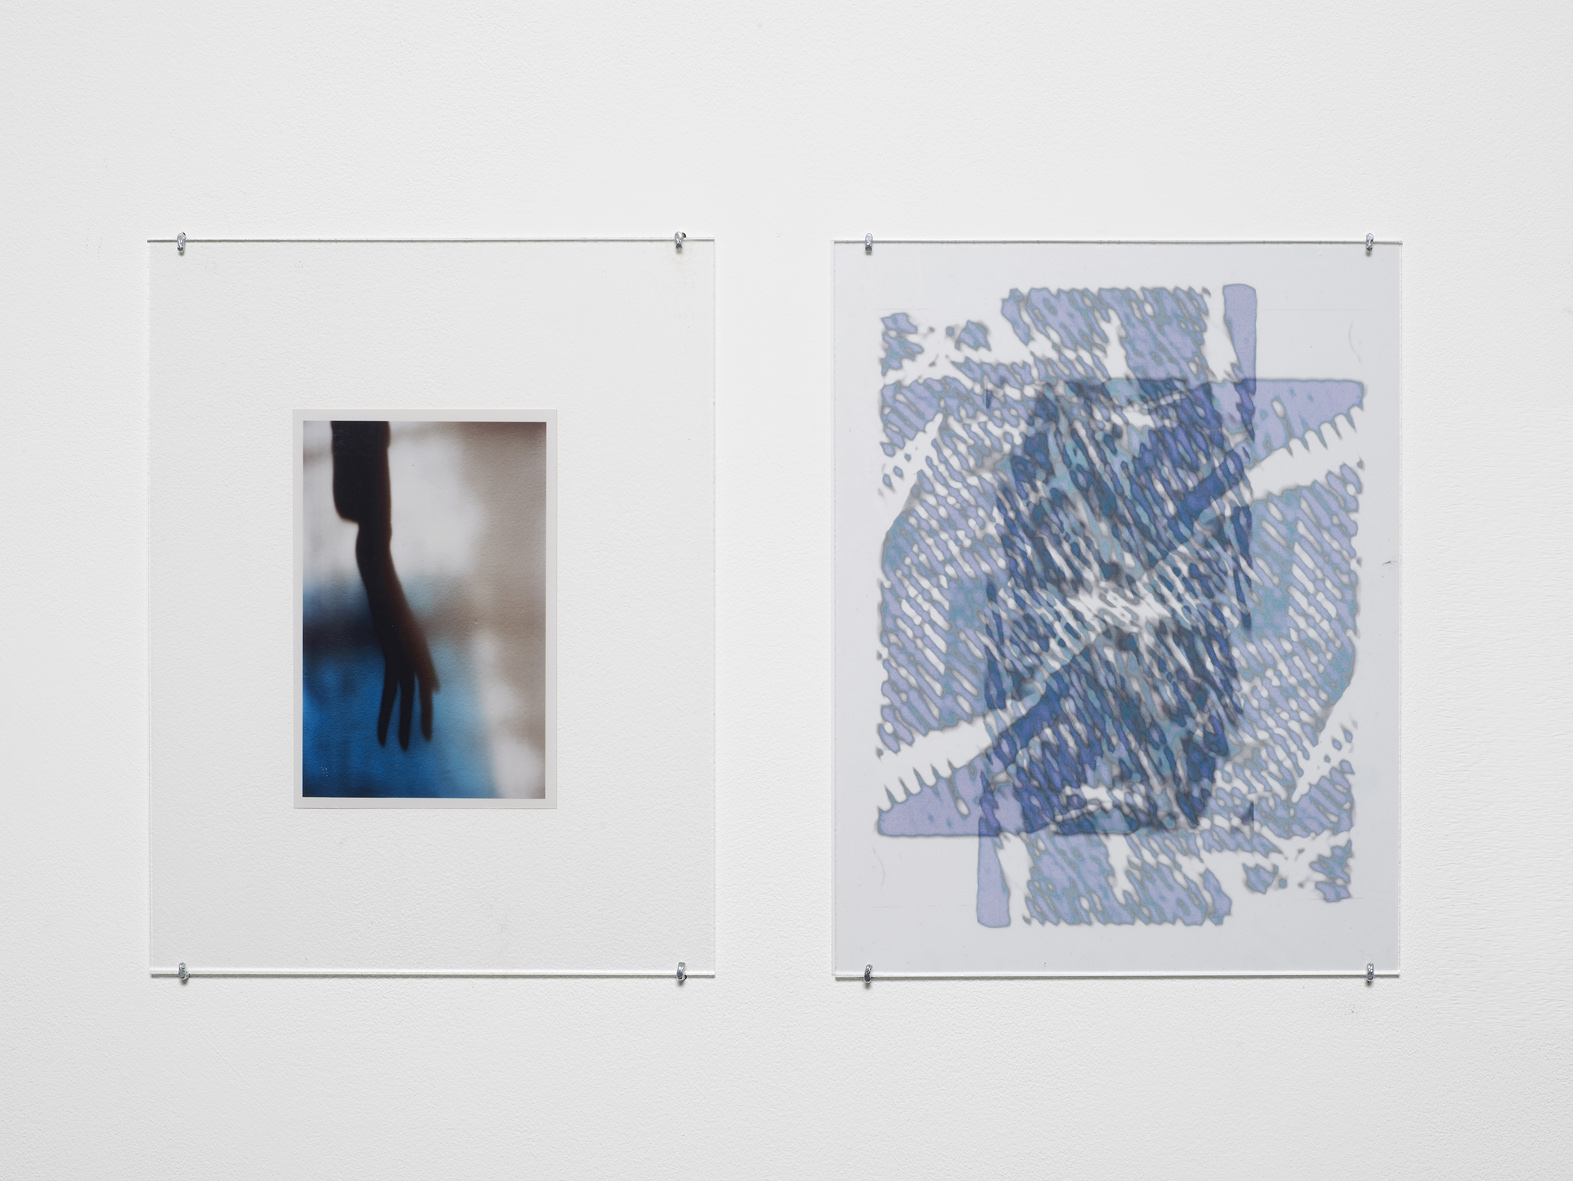     Untitled 2014-2015 Unique C-print, inkjet print on two transparencies, non-reflective perspex, L shaped pins&nbsp; 2 parts, each: 27.9 x 21.5 cm / 11 x 8.5 in 